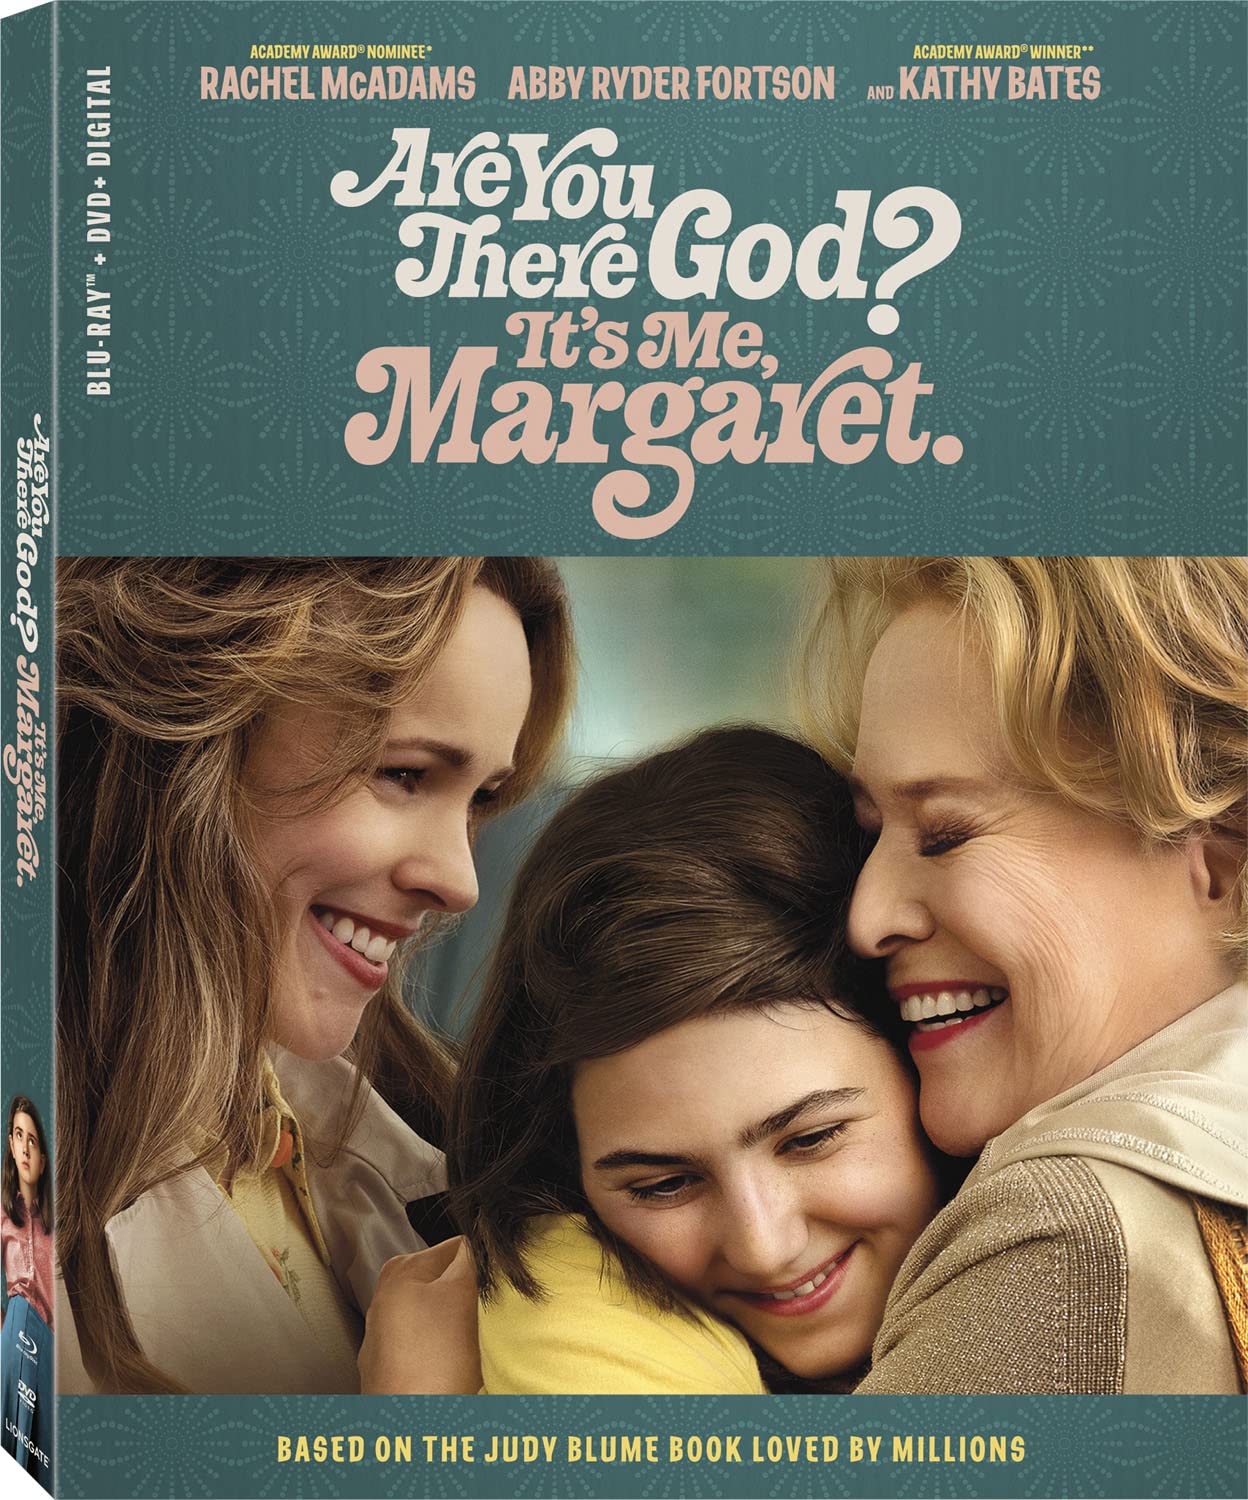 Are You There God It's Me Margaret HD Digital Code (Vudu and iTunes)